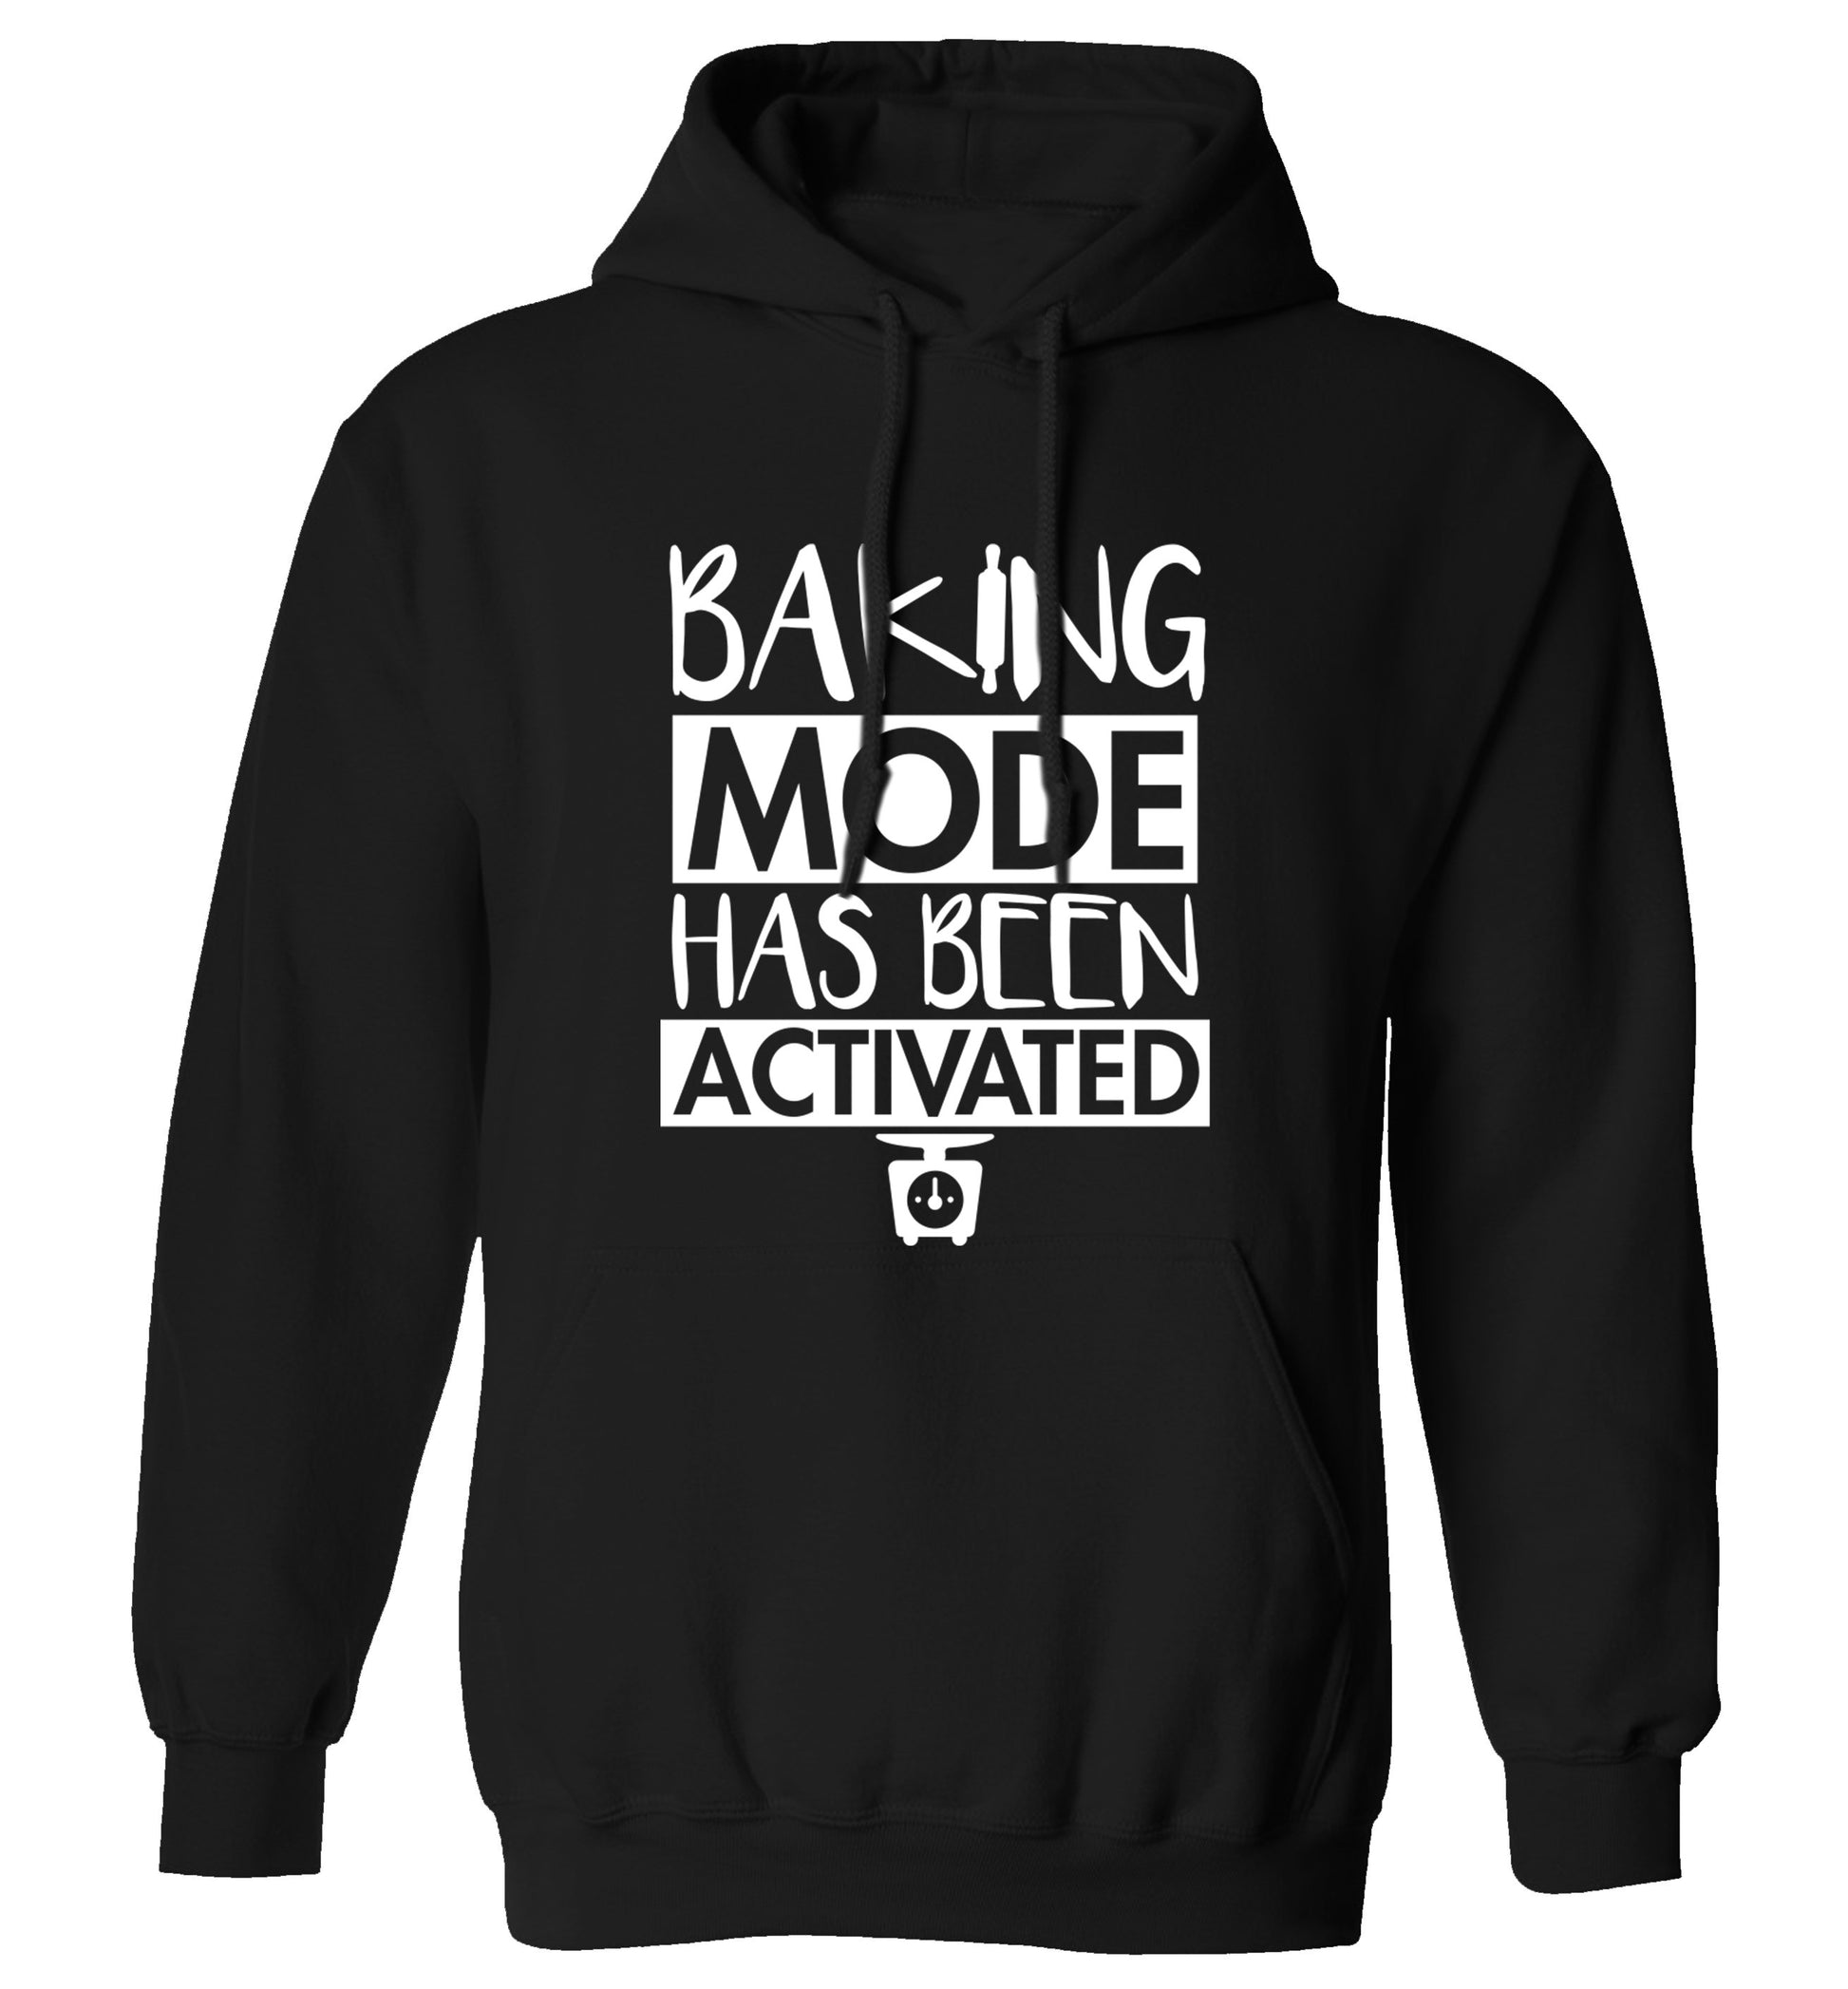 Baking mode has been activated adults unisex black hoodie 2XL